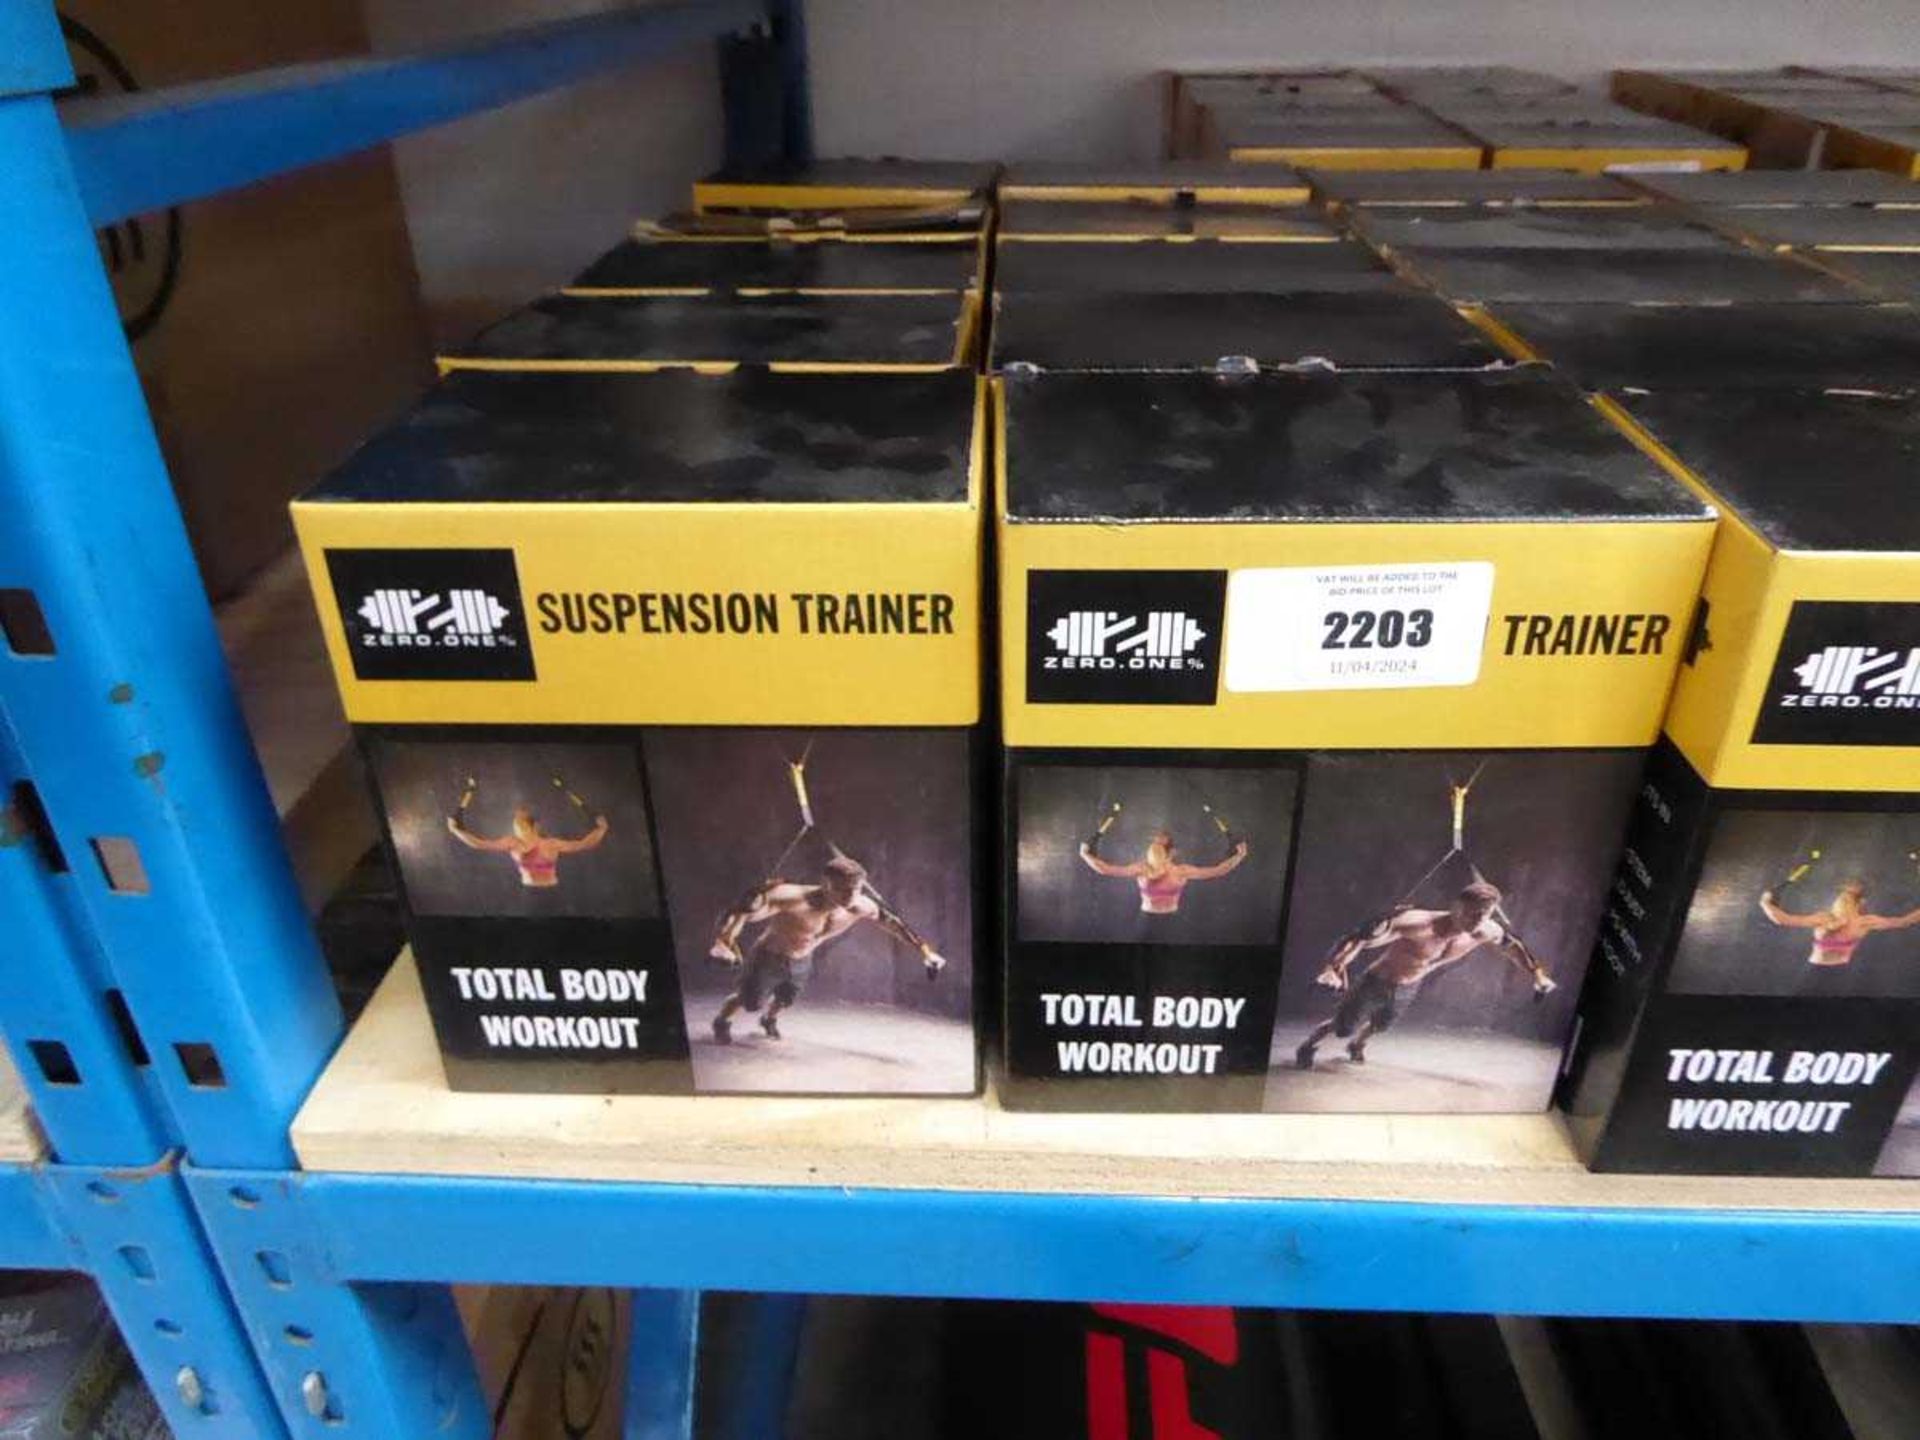 +VAT 10 boxes of Total Body Workout suspension trainers